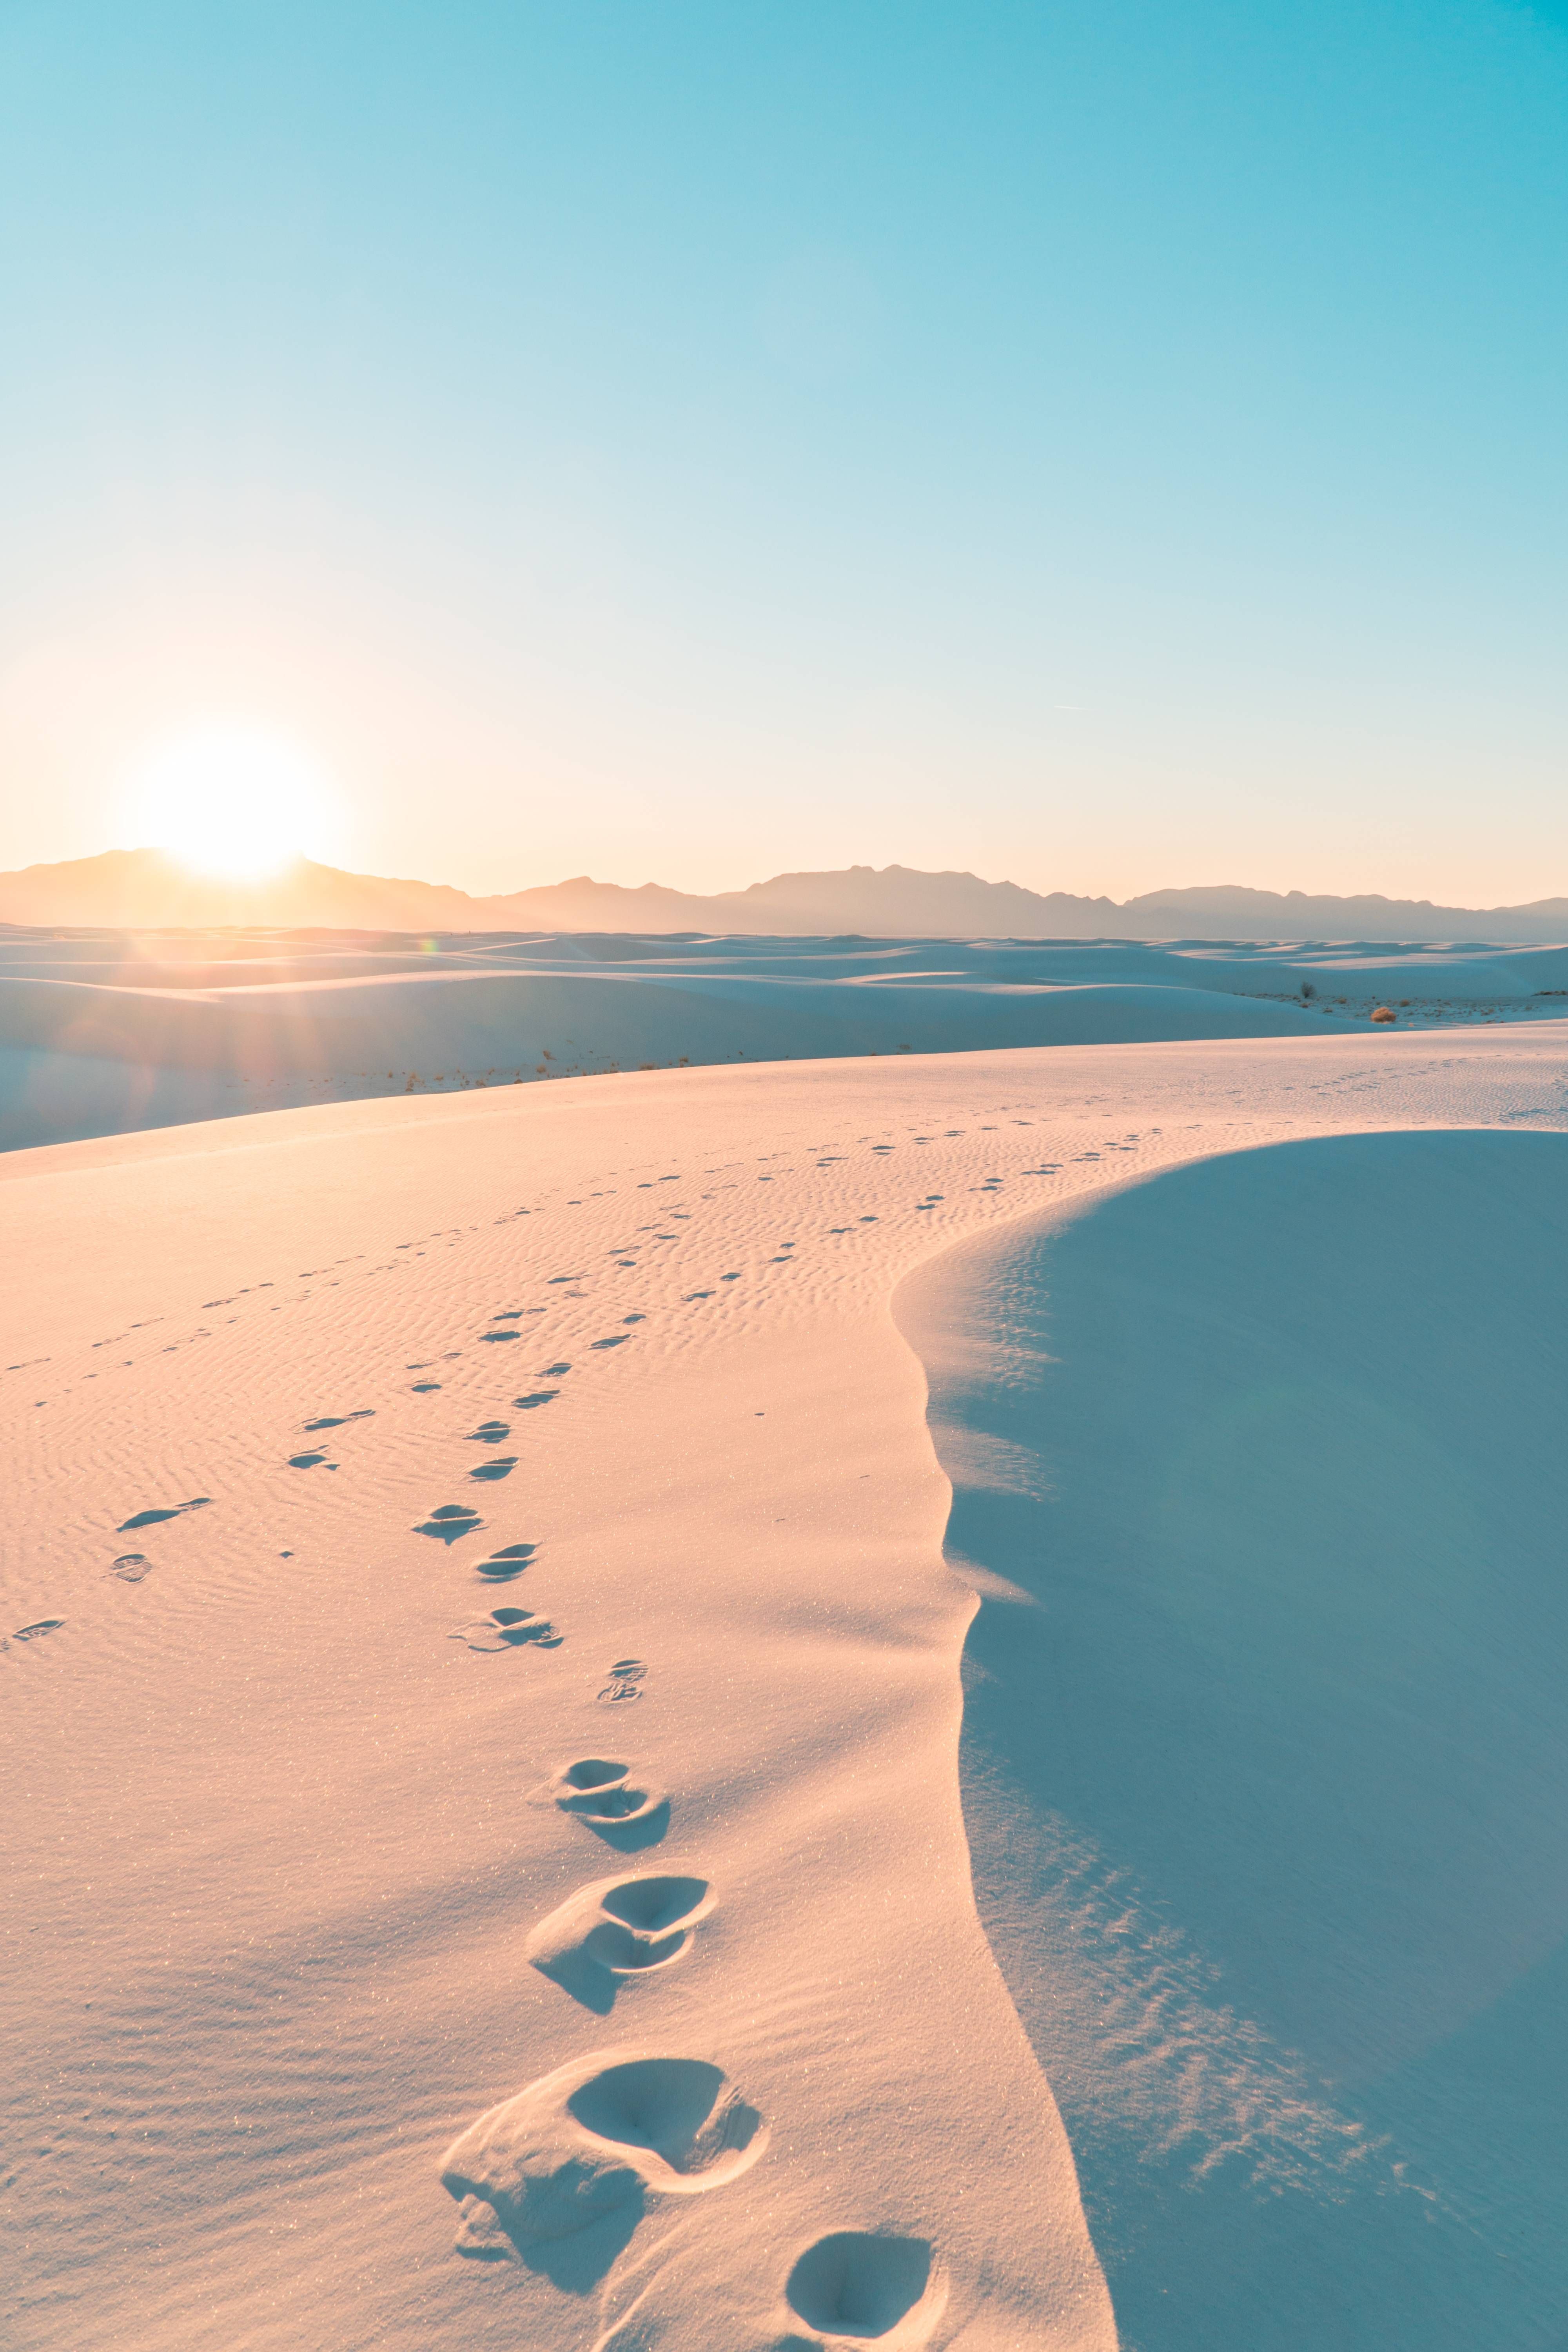 I hiked these dunes for hours with a compass. White Sands, New